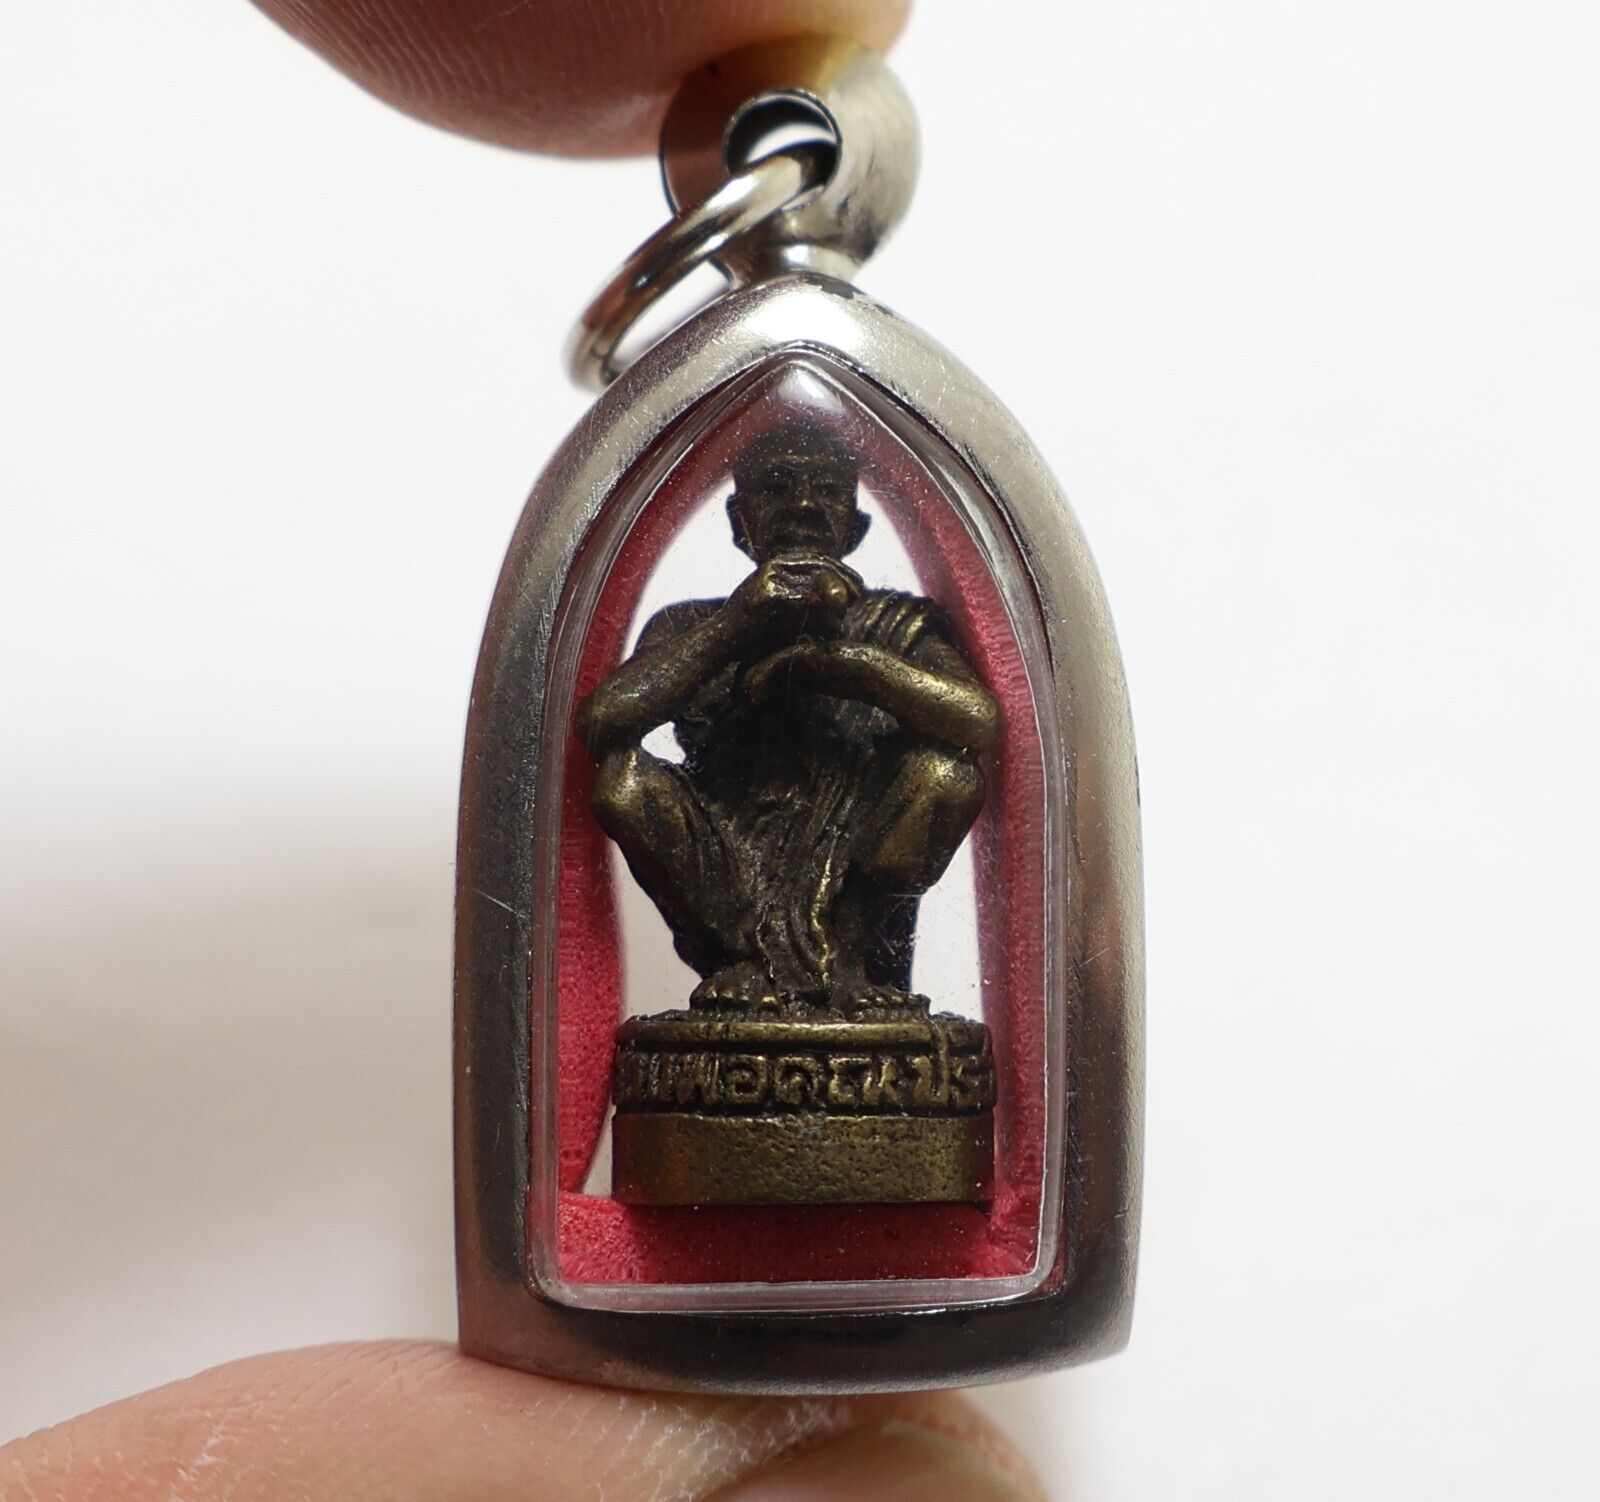 LP KOON SMALL AMULET BLESSED 1989 MULTIPLY MONEY RICH THAI BUDDHA LUCKY PENDANT